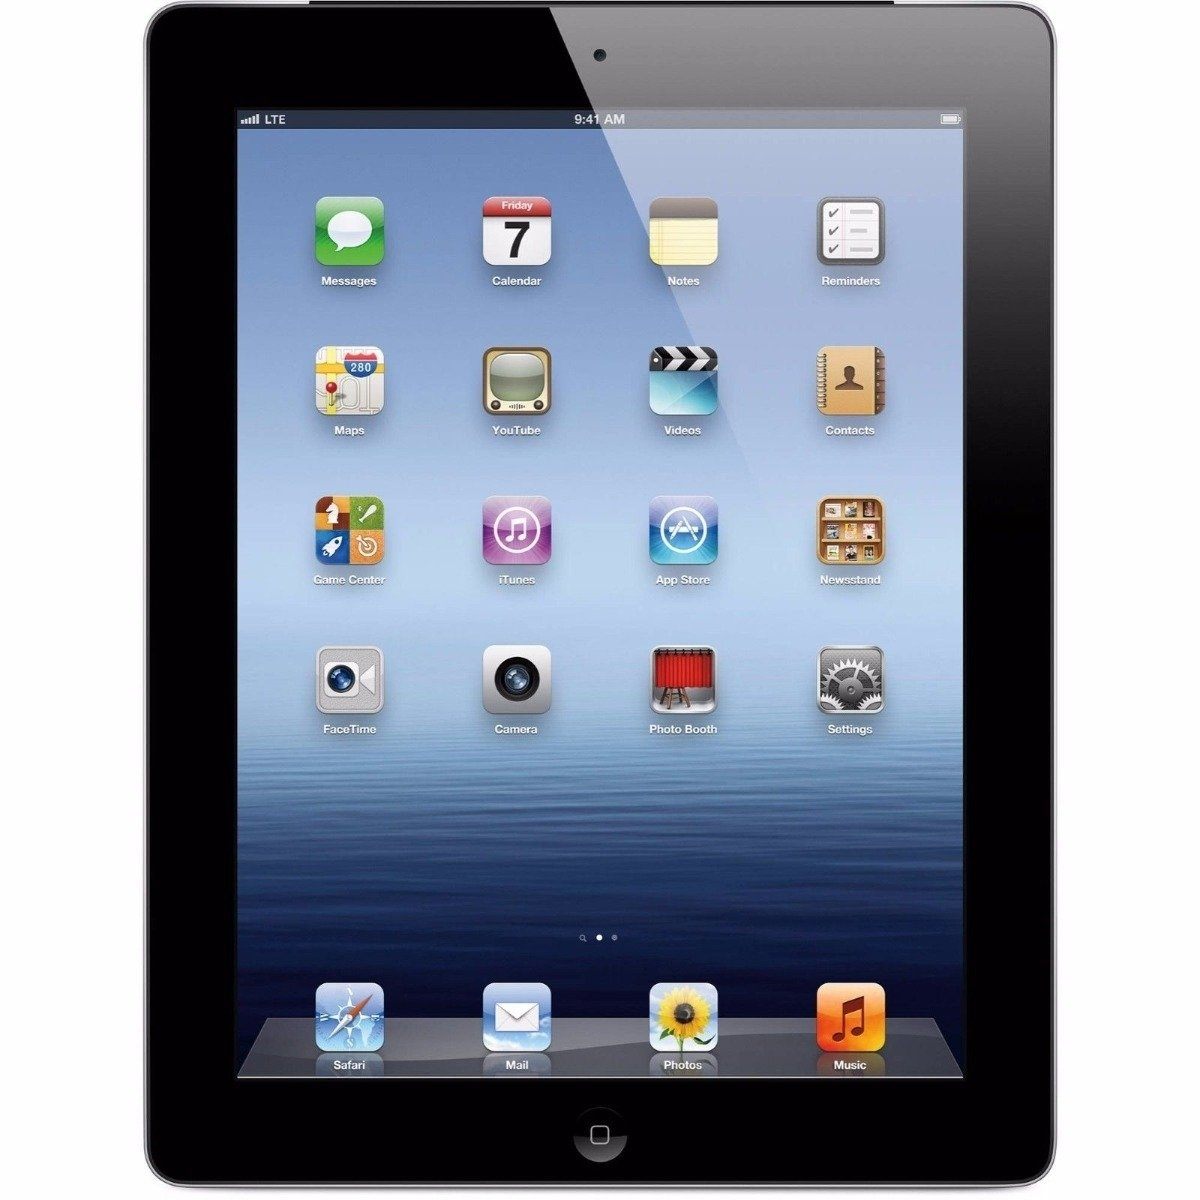 Apple iPad 2 WiFi + 3G Factory Unlocked - Assorted Colors and Sizes / Black / 64GB